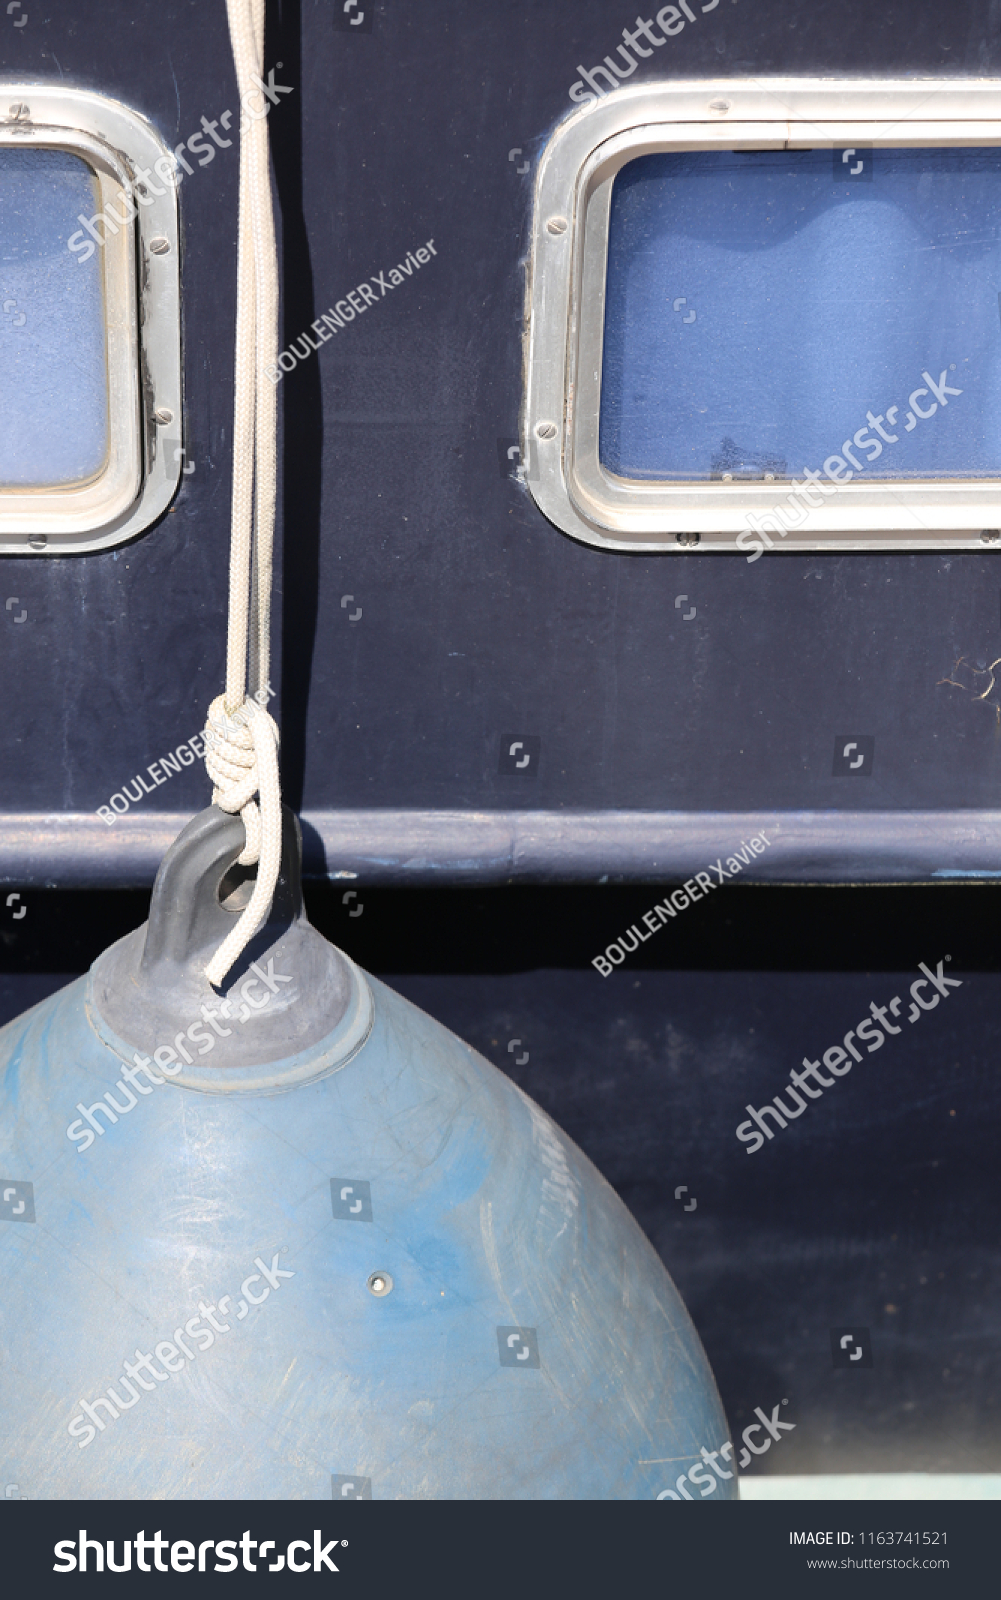 Close up outdoor view of part of a black boat hull with two white glass windows, blue curtains, a rope with a rounding float. Abstract image of maritime equipment, Bright surface and round shapes.  #1163741521